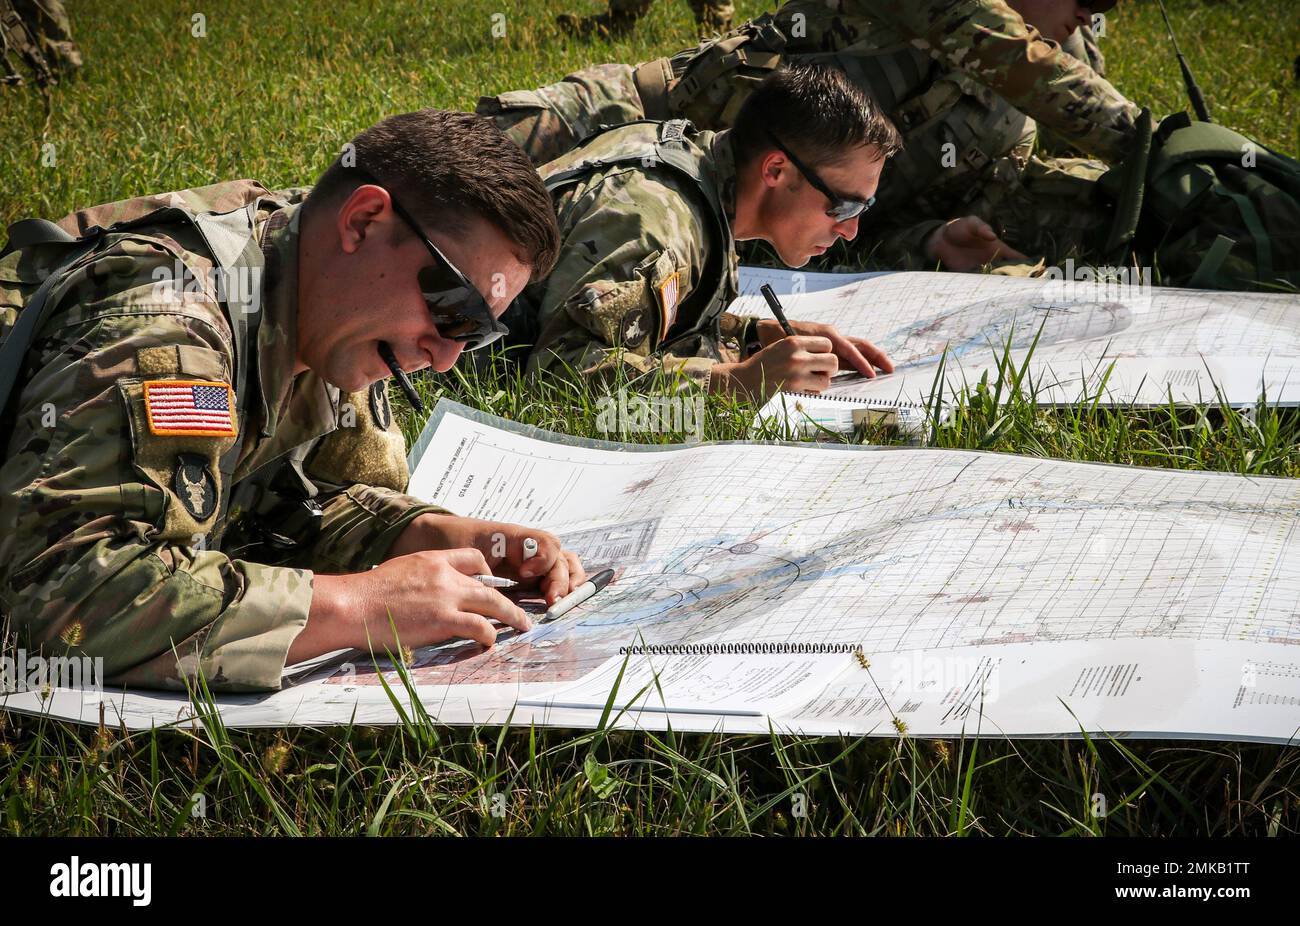 U.S. Army Soldiers make measurements using terrain maps during an air drop and sling load exercise as part of a U.S. Pathfinder course at Camp Dodge in Johnston, Iowa, on Sept. 8, 2022. Nearly 30 Soldiers graduated the course, which was taught by a mobile training team at the Army National Guard Warrior Training Center in Fort Benning, Georgia. Army Pathfinders are trained to provide navigational aid and advisory services to military aircraft in areas designated by supported unit commanders. During the Pathfinder course, students are instructed in aircraft orientation, aero-medical evacuation, Stock Photo